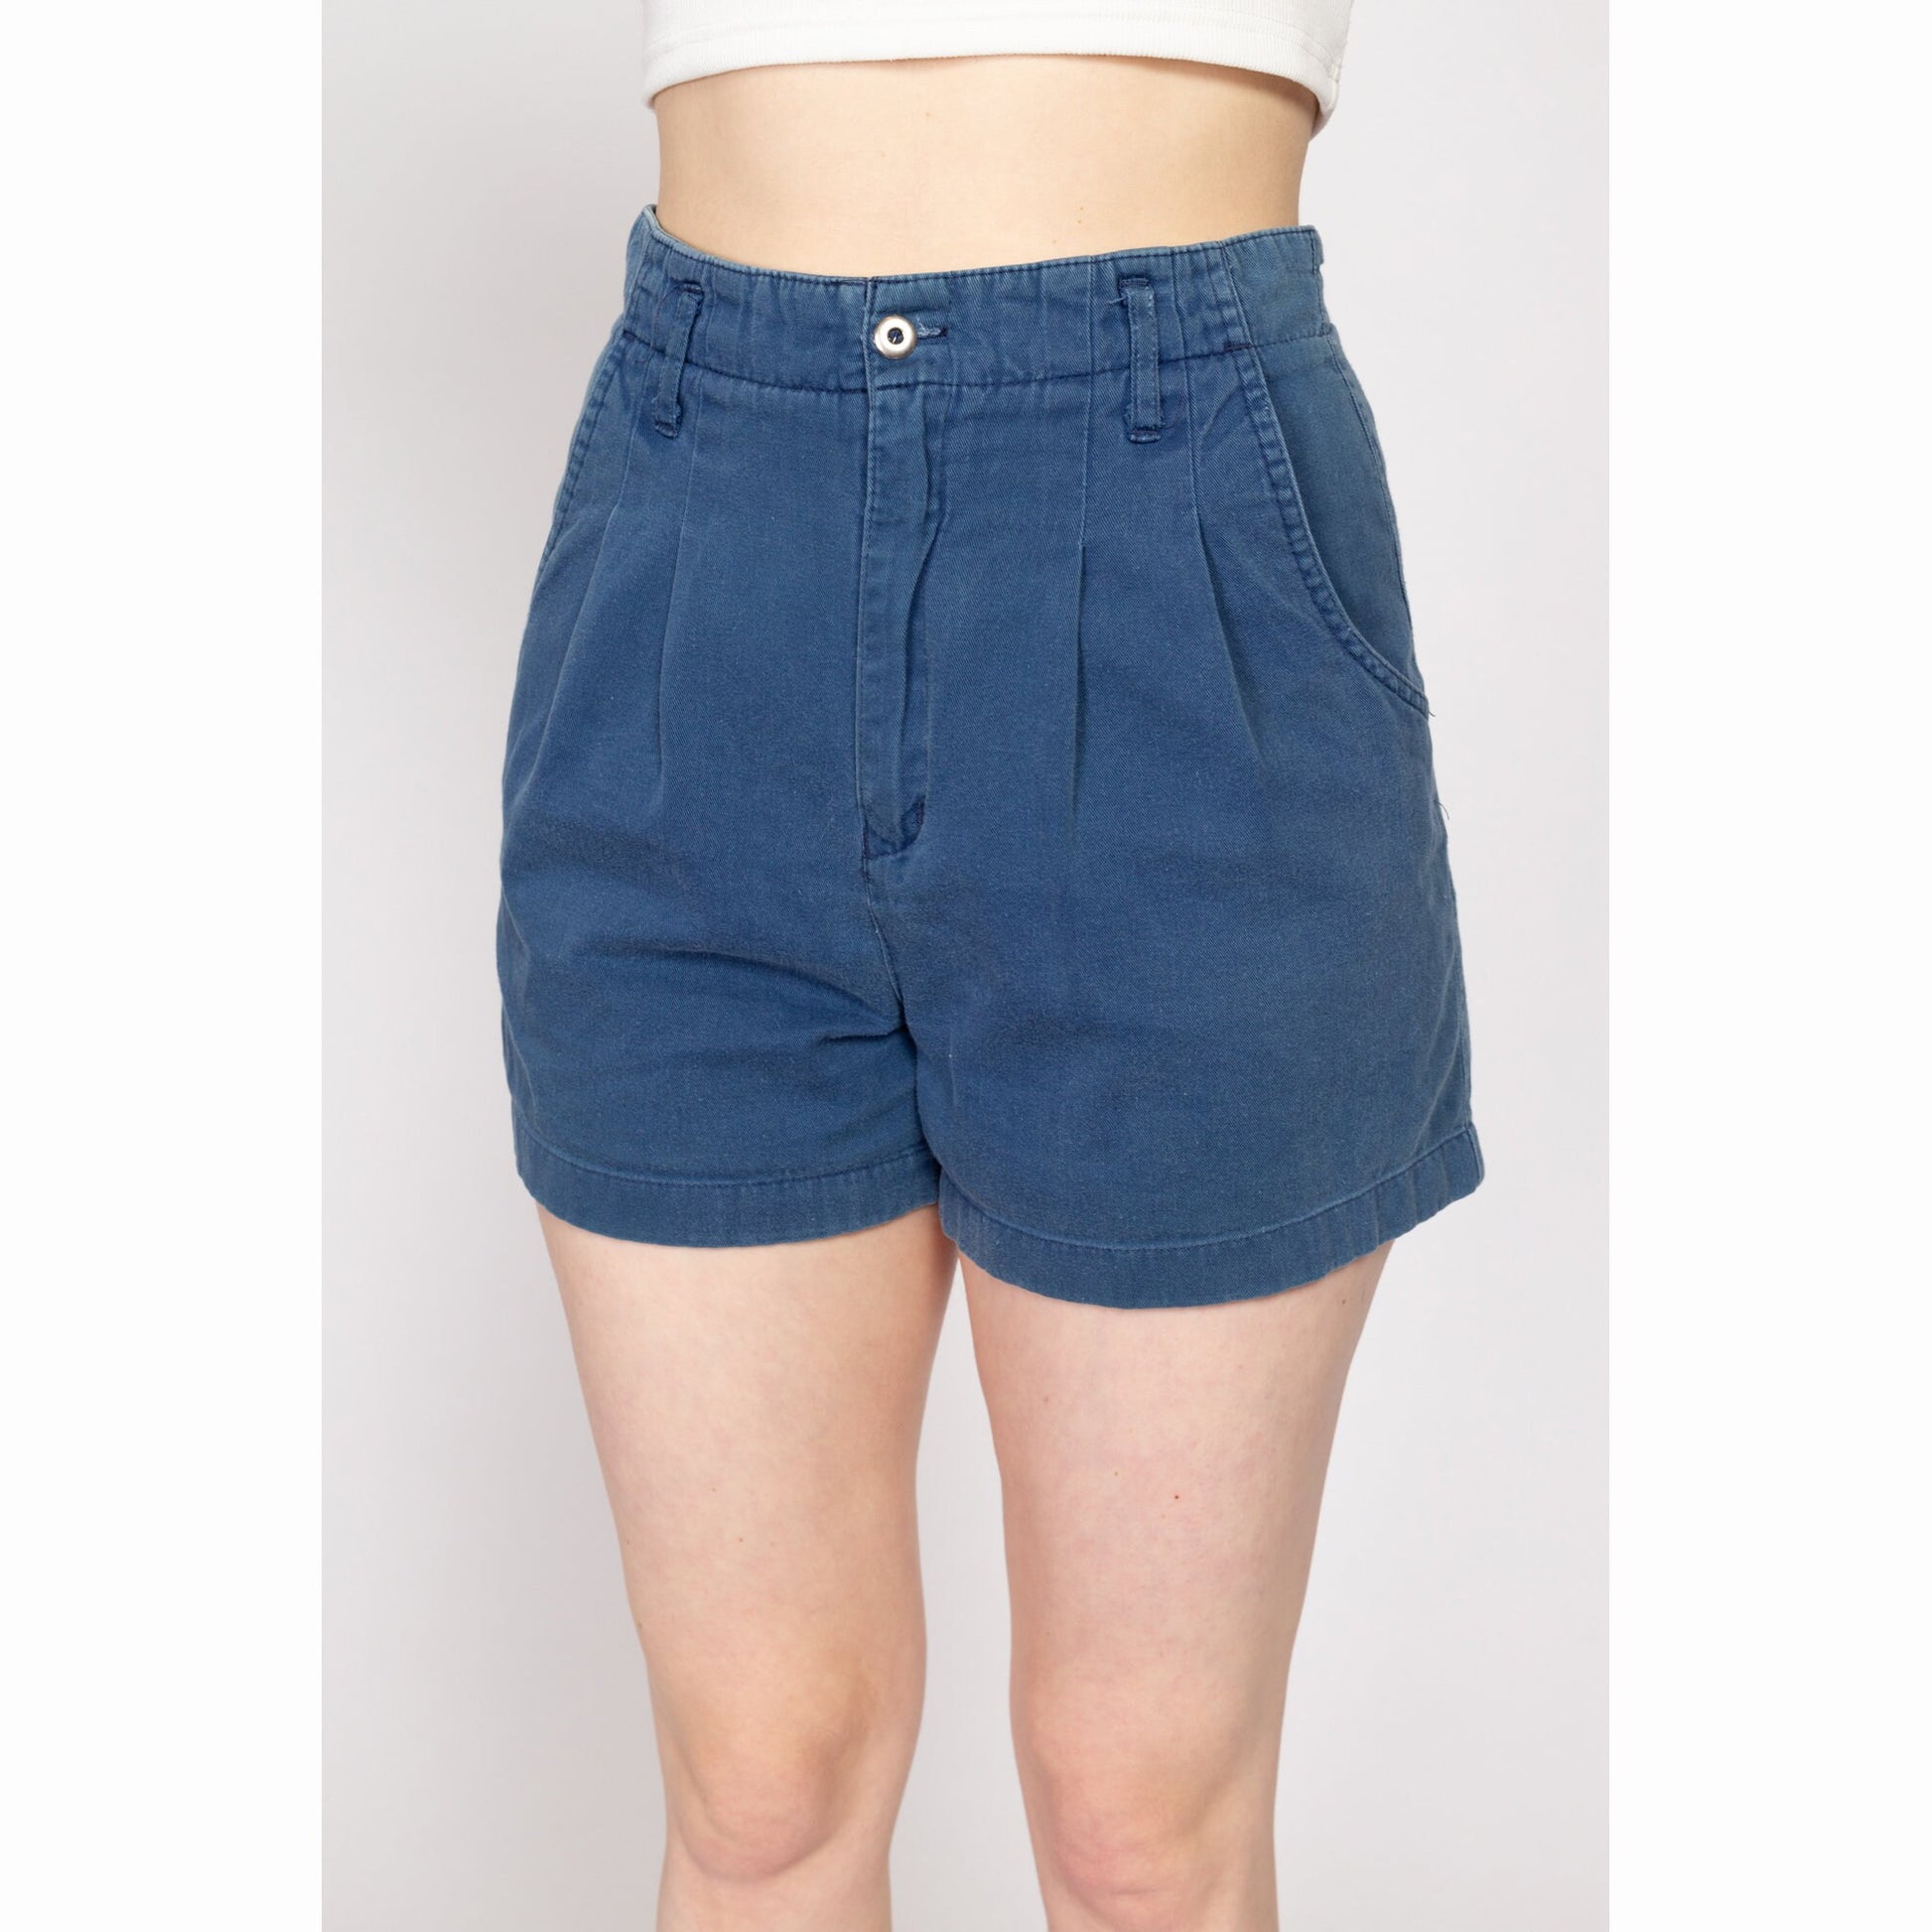 Medium 80s Navy Blue High Waisted Shorts 27"-29" | Vintage Cotton Casual Pleated Shorts